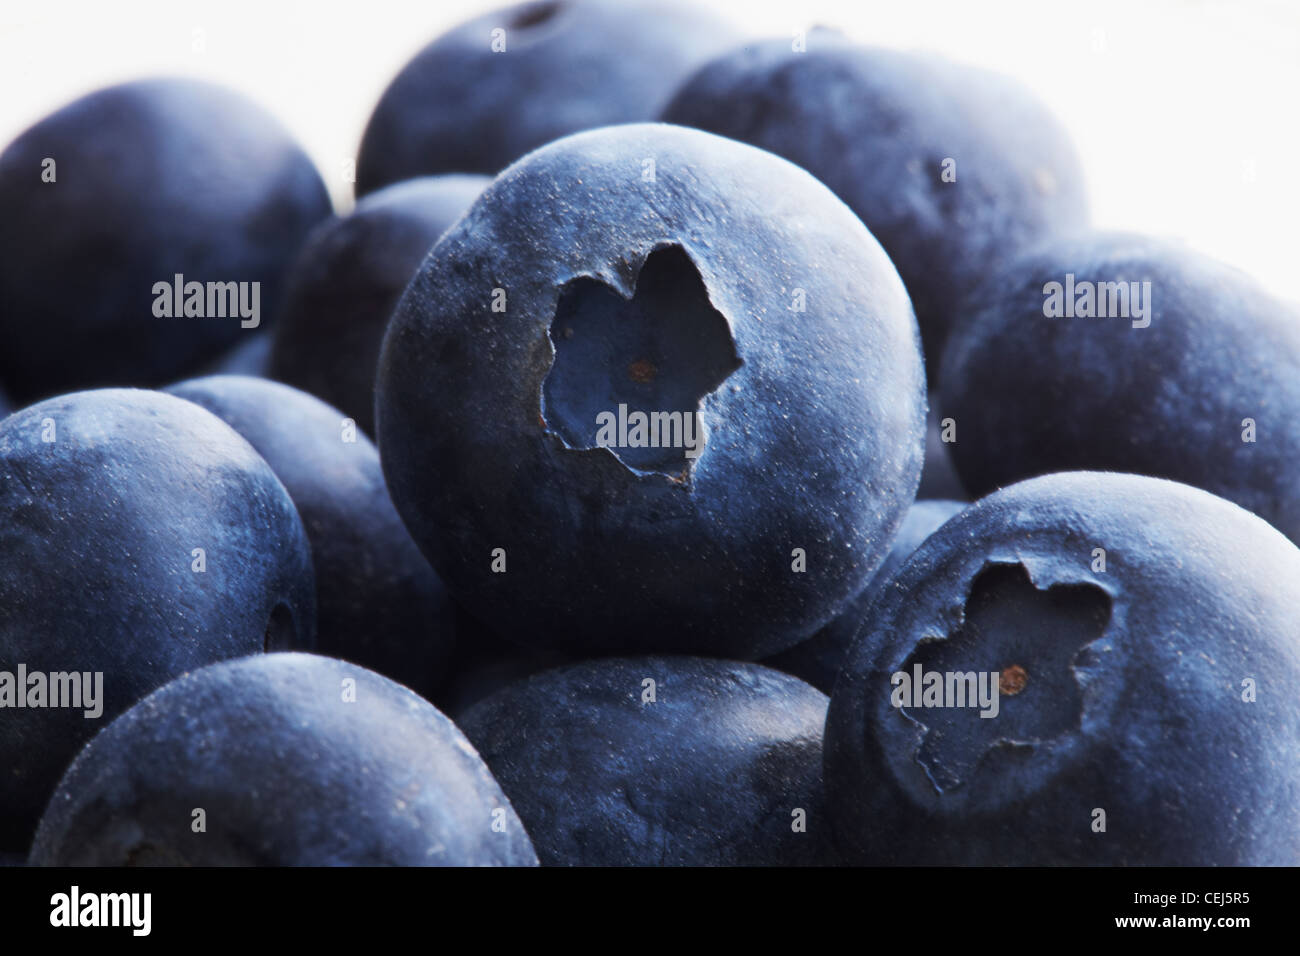 close up of Blueberries in a glass bowl Stock Photo